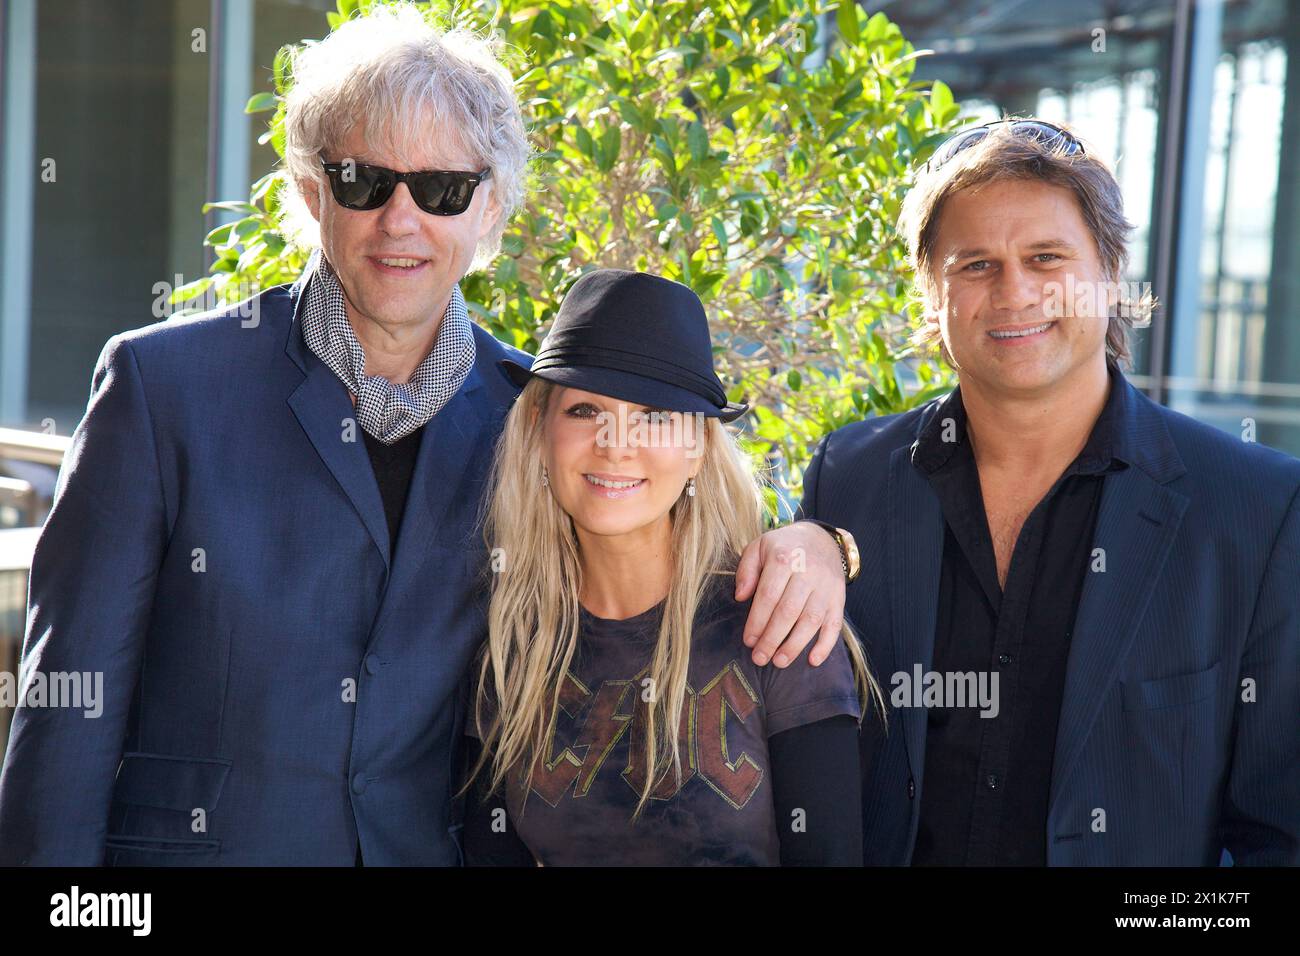 Sir Bob Geldof, Danielle Spencer & Jon Stevens were in Sydney to host a charity concert in aid of disaster response . ANZ and Star City presented the Stock Photo